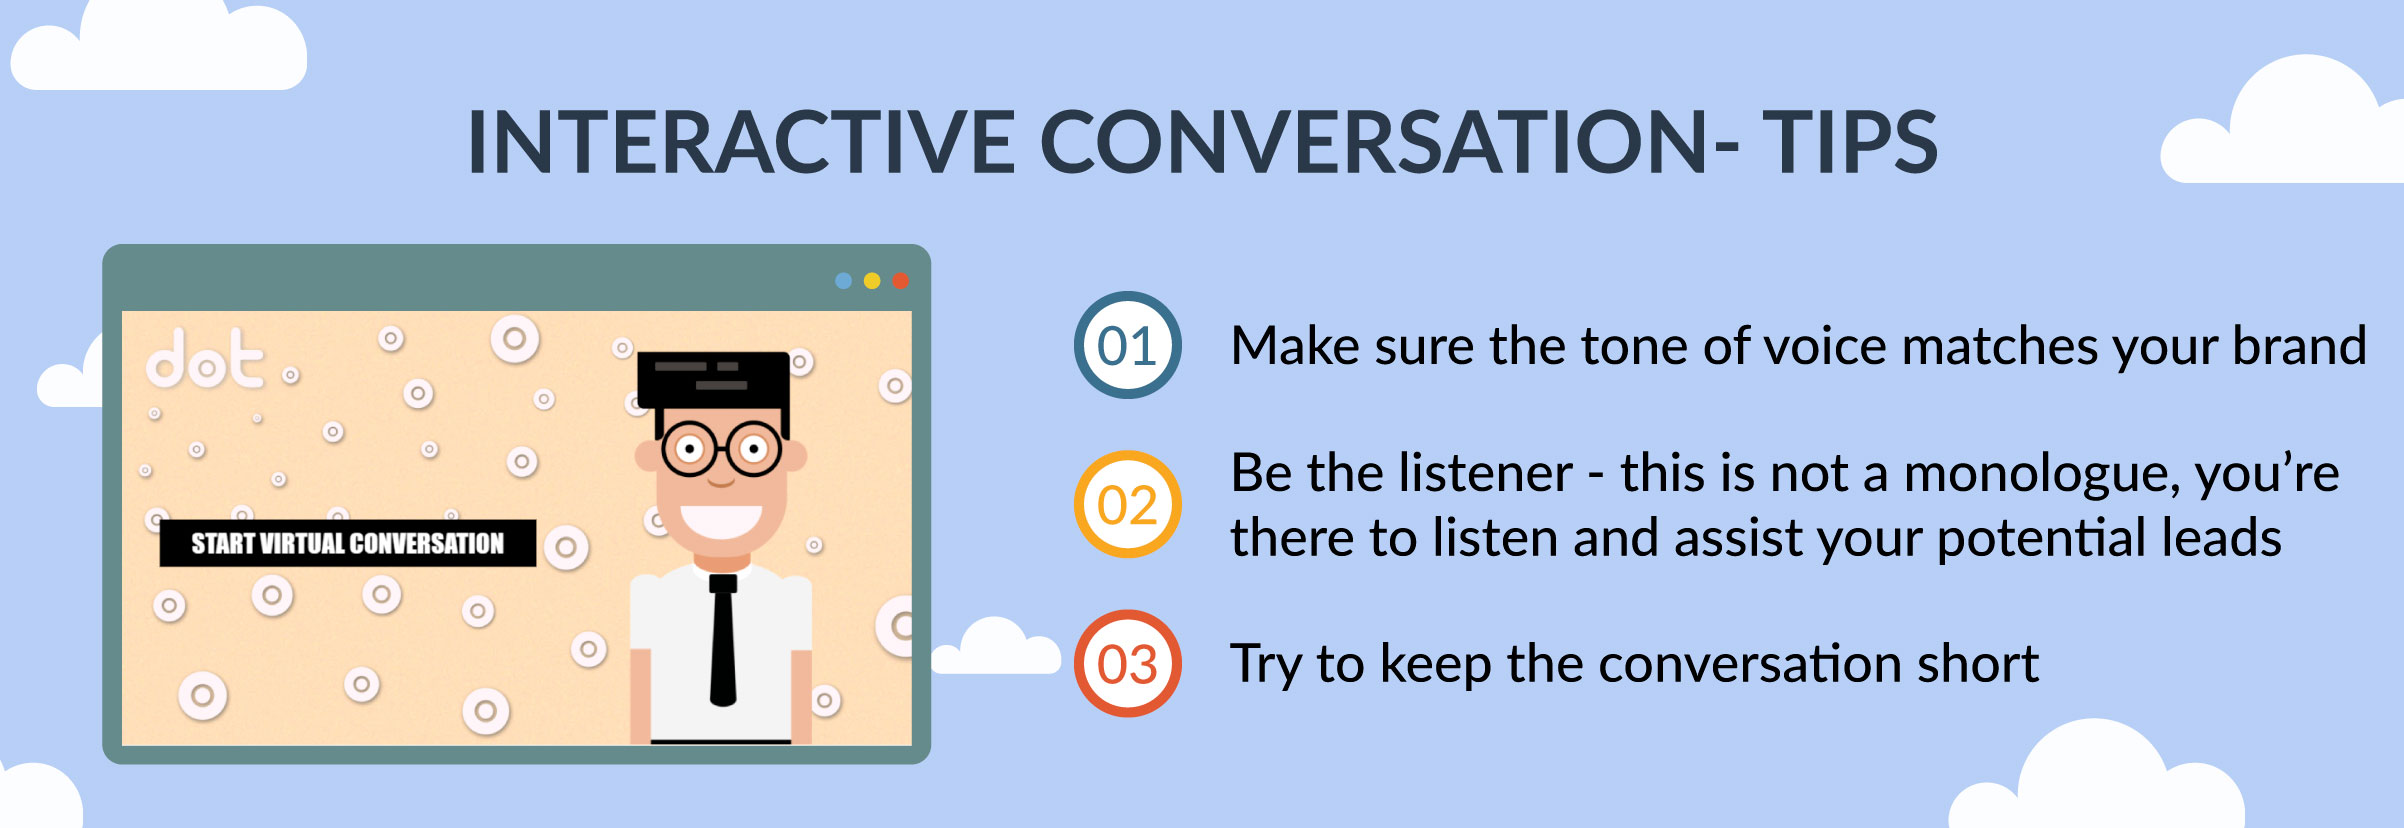 how-to-create-interactive-conversation-tips